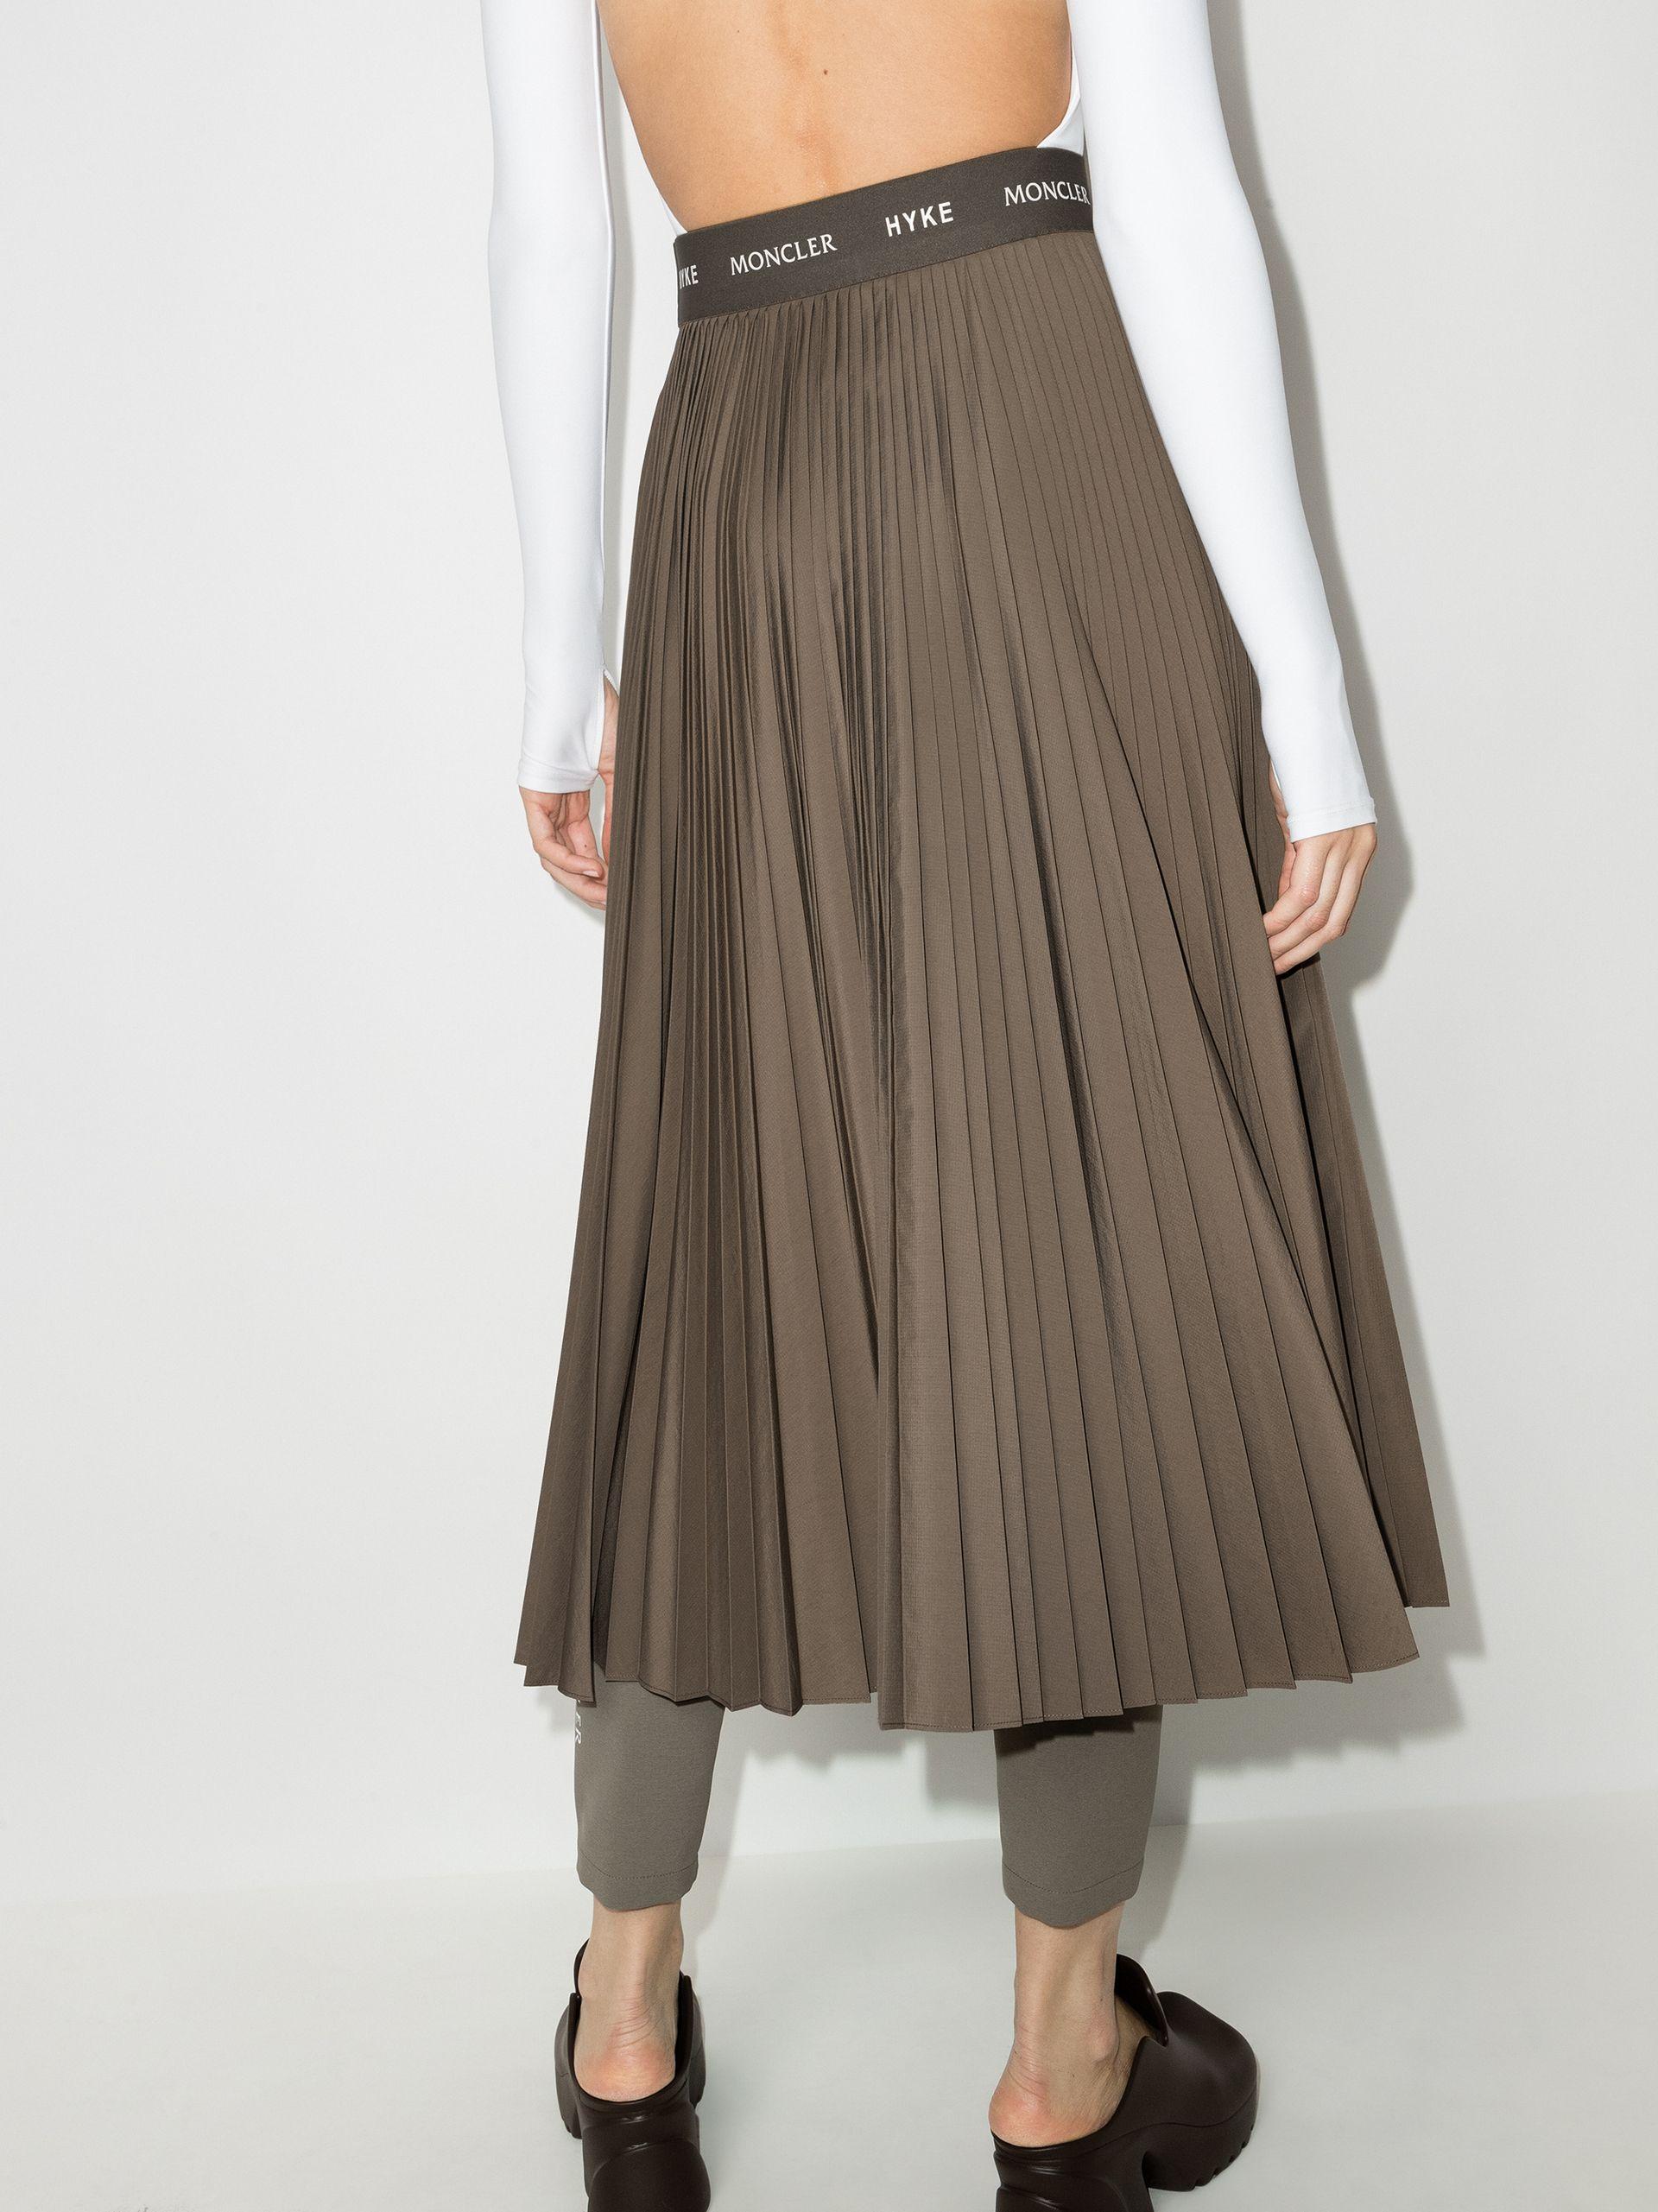 Moncler Genius Synthetic 4 Moncler Hyke Pleated Midi Skirt in 